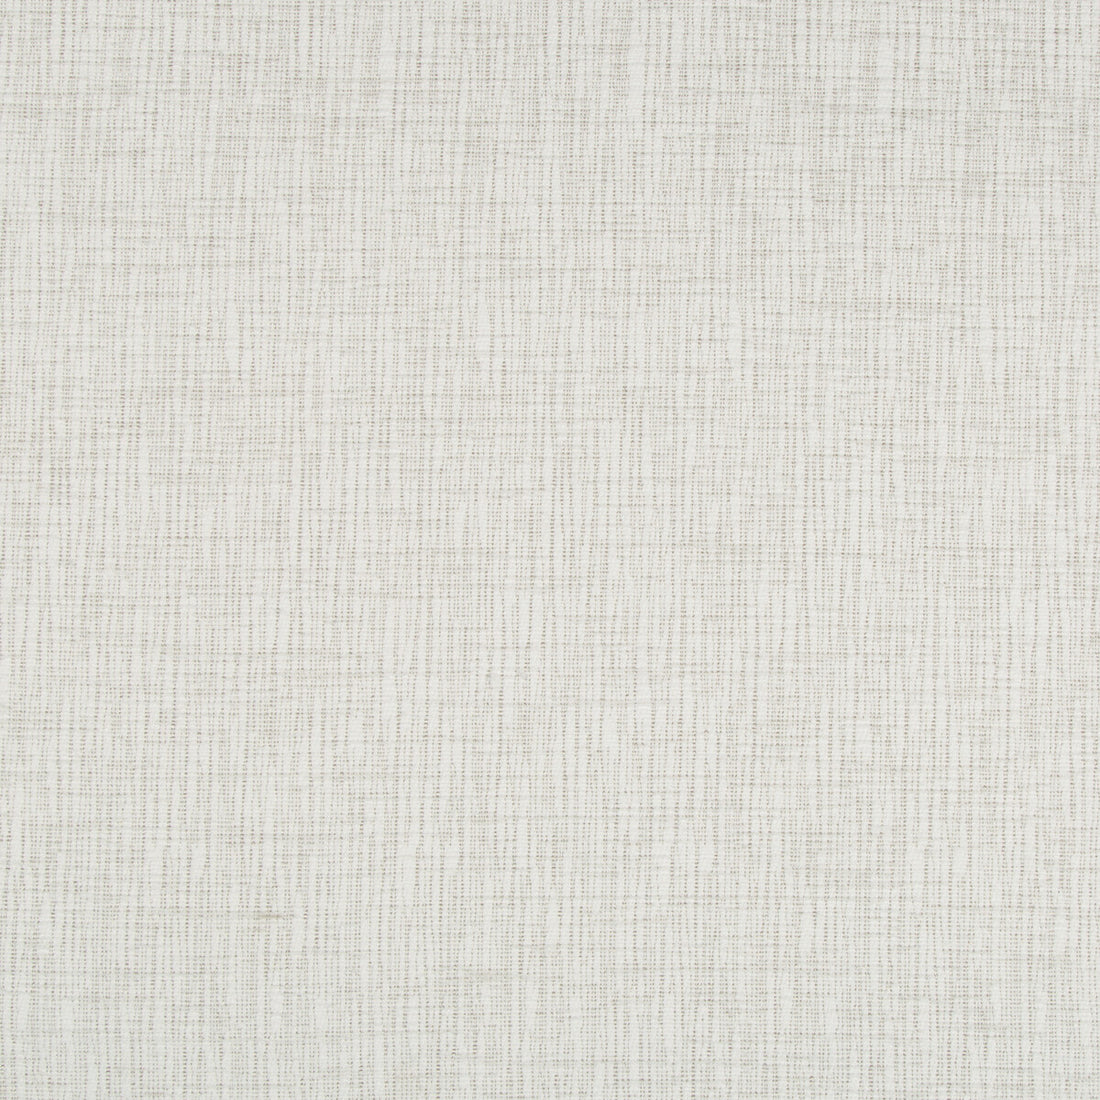 Mysto fabric in oyster color - pattern 35003.11.0 - by Kravet Basics in the Jeffrey Alan Marks Oceanview collection